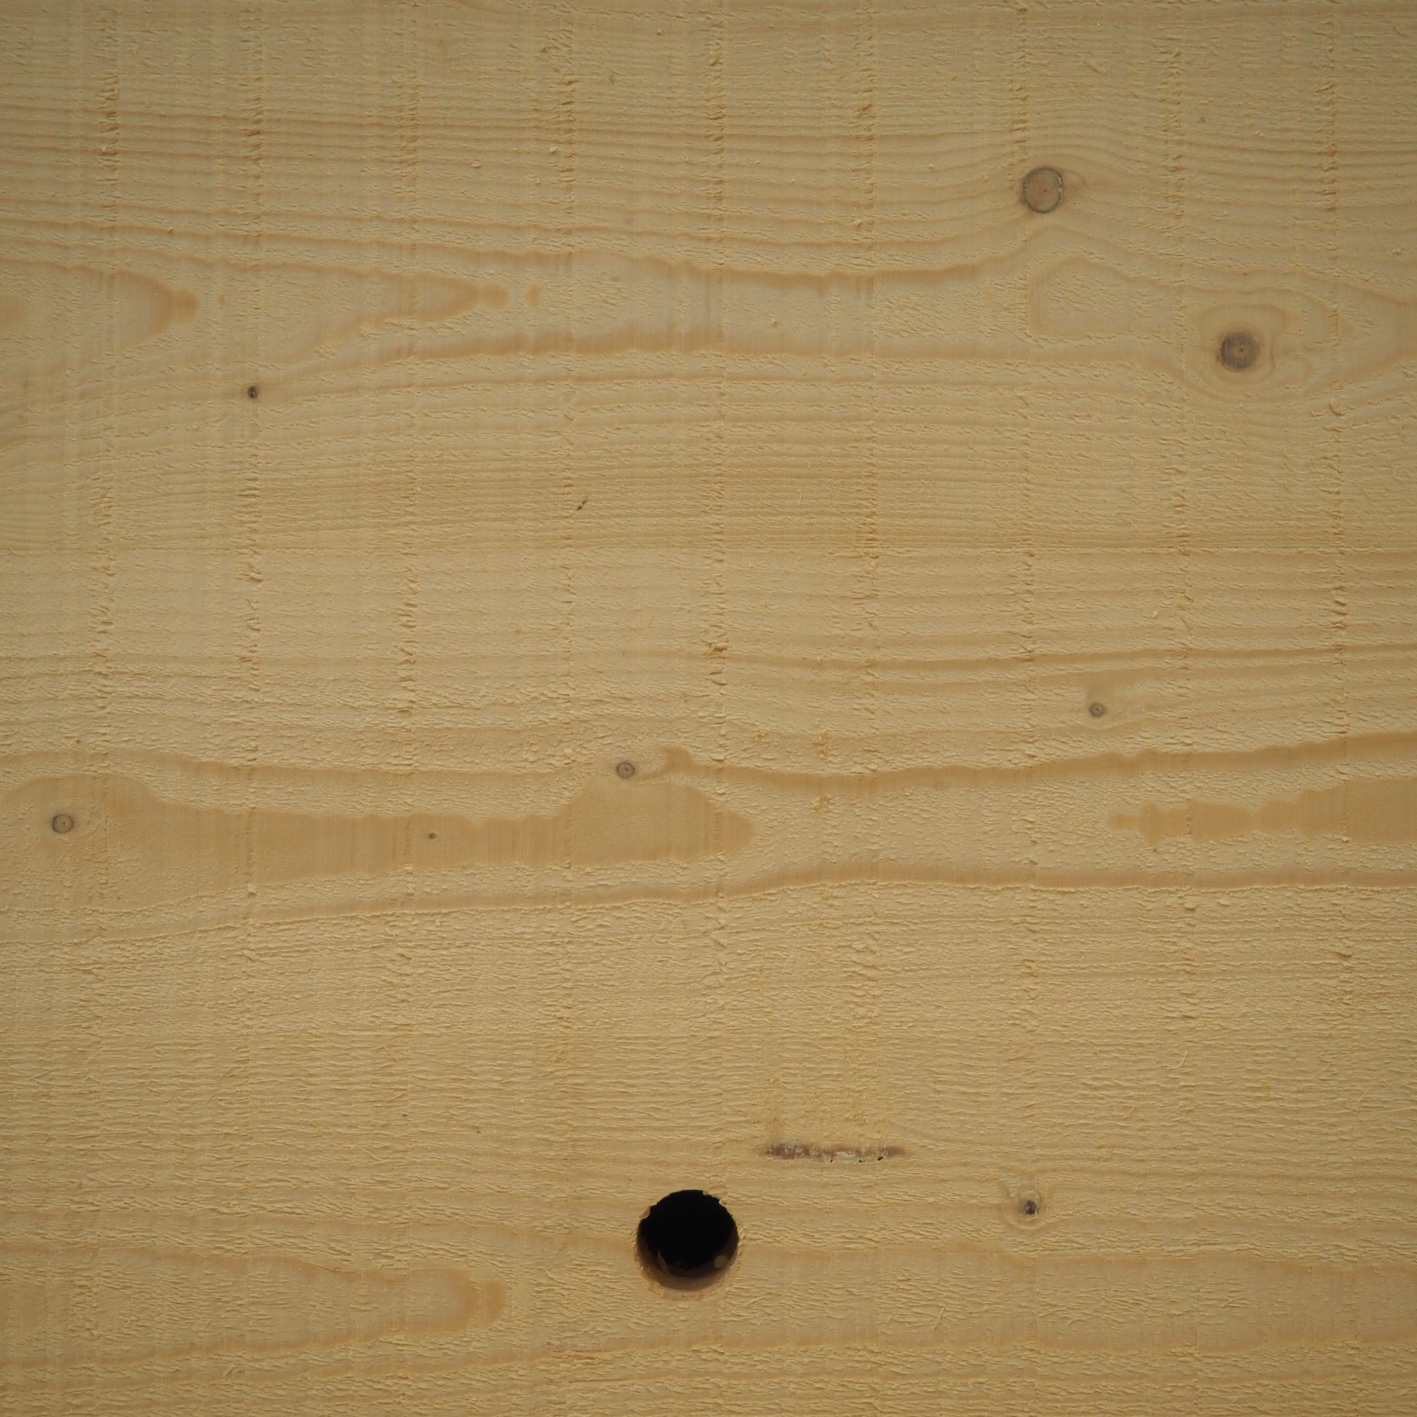 Glued laminated timber panel (8 cm thick)